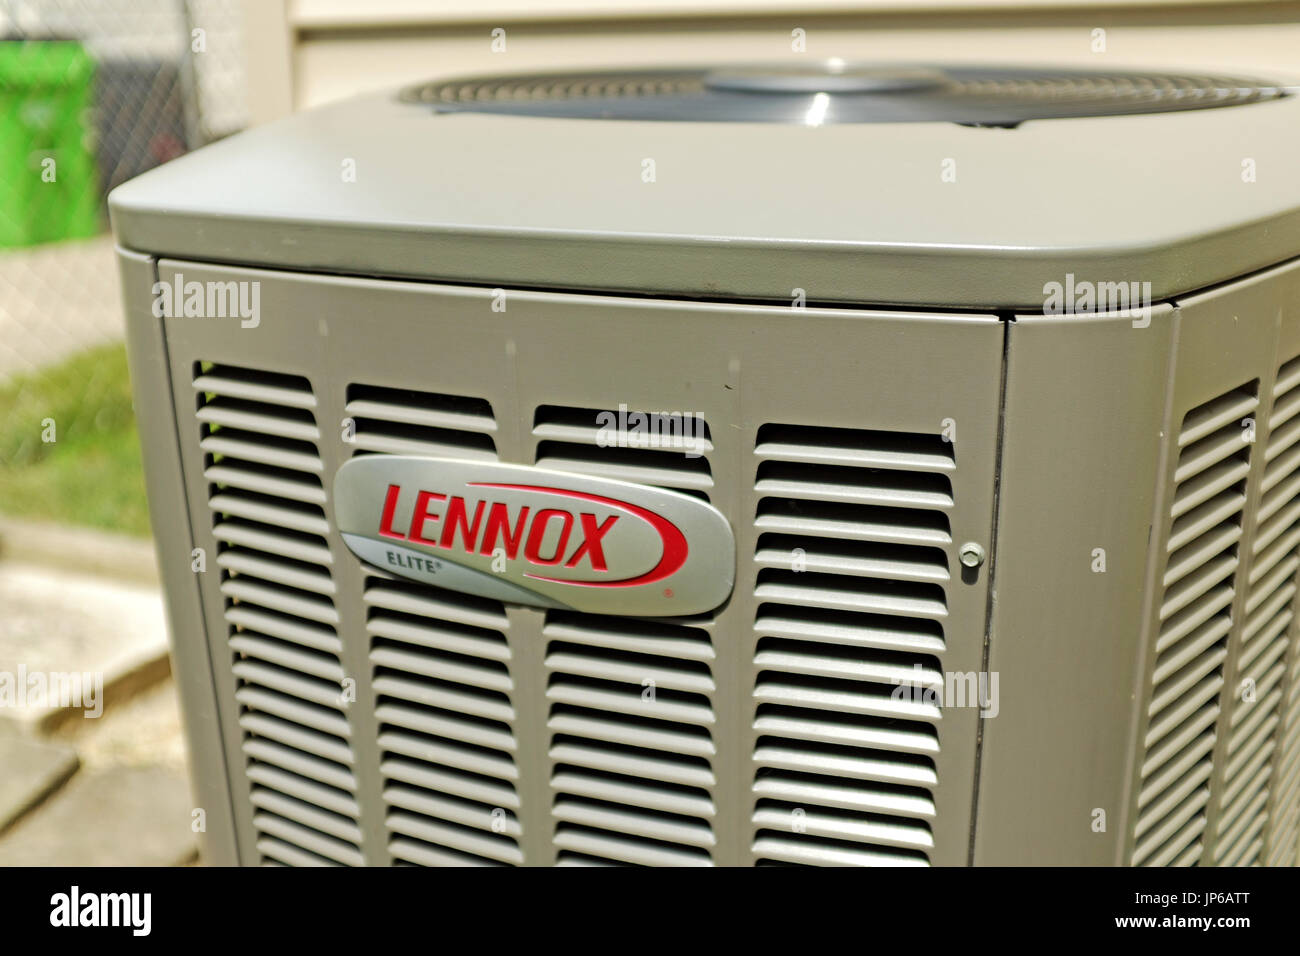 Lennox Elite home air-conditioning unit sits outside in the summer sun. Stock Photo